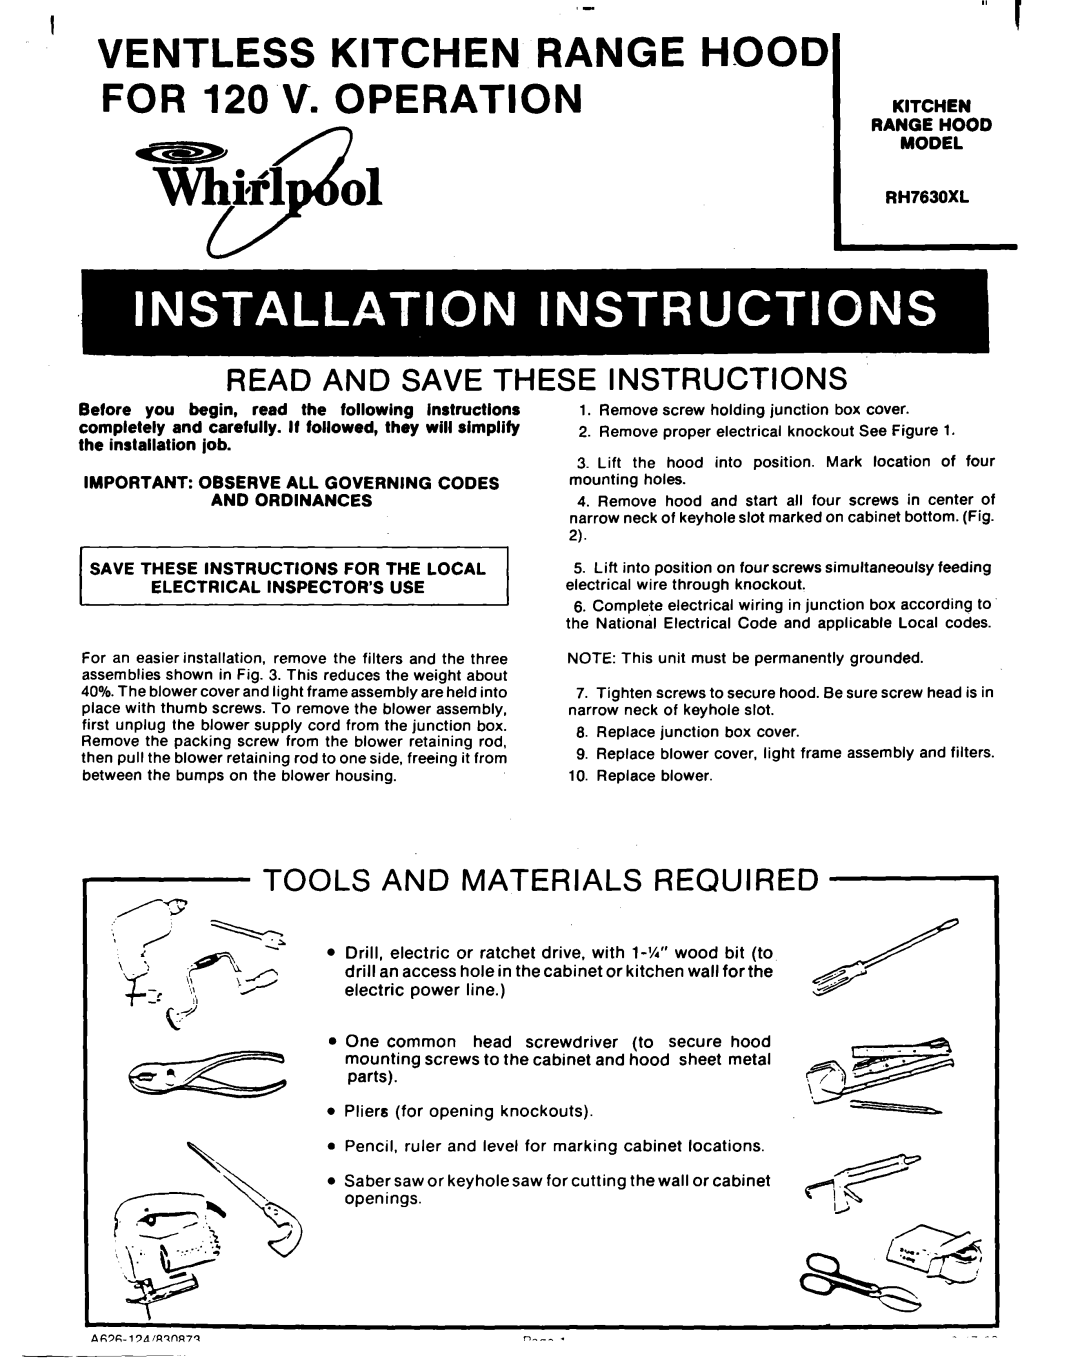 Whirlpool RH7630XL manual Tiiifl, ’VENTLESS KITCHEN RANGE HOOD FOR 12O.V. OPERATION, Read And Save These Instructions 